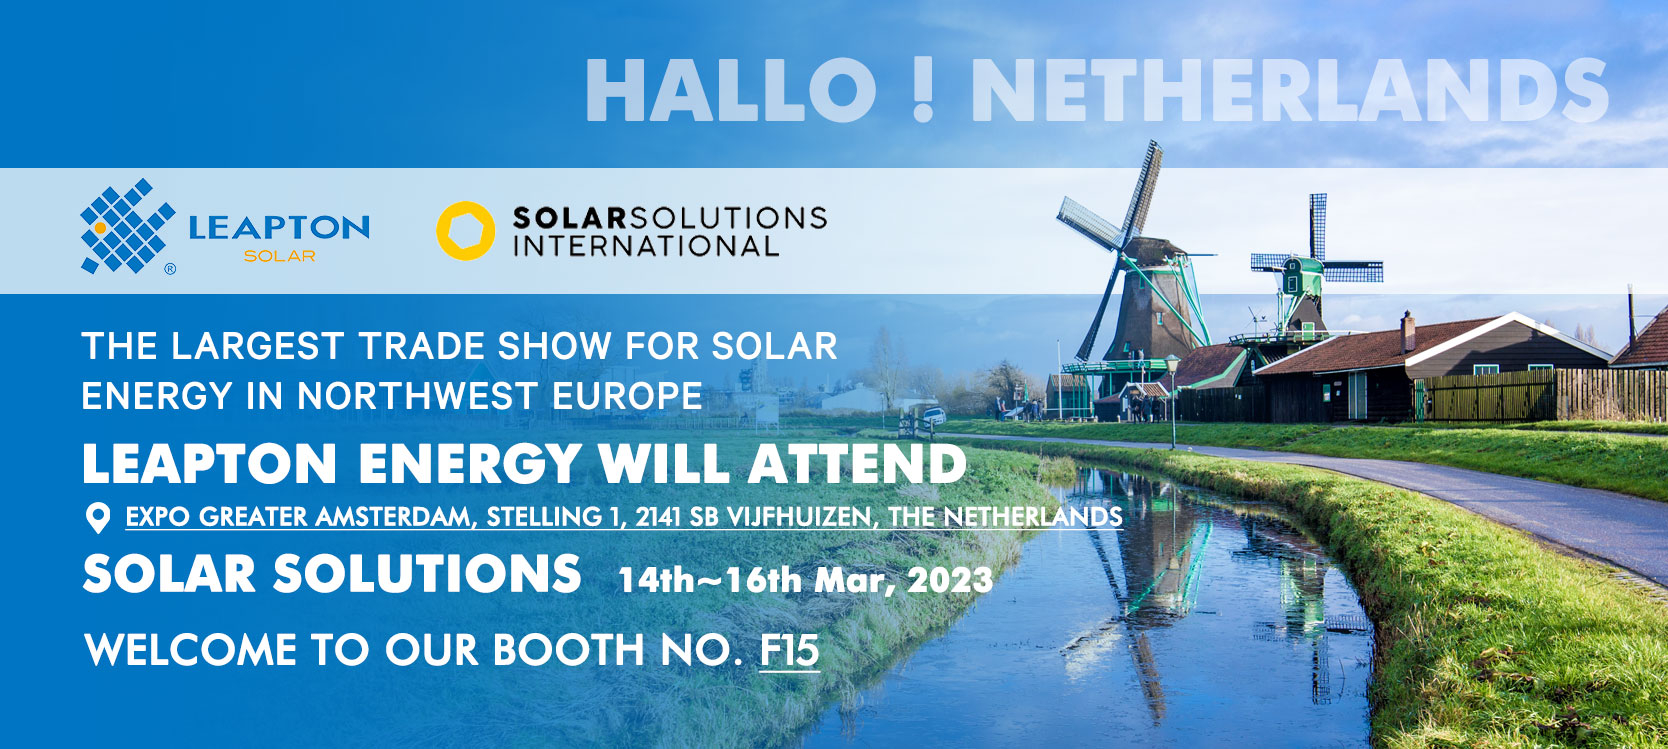 Leapton Energy will attend solar solutions 2023 on 14th~16th Mar, 2023